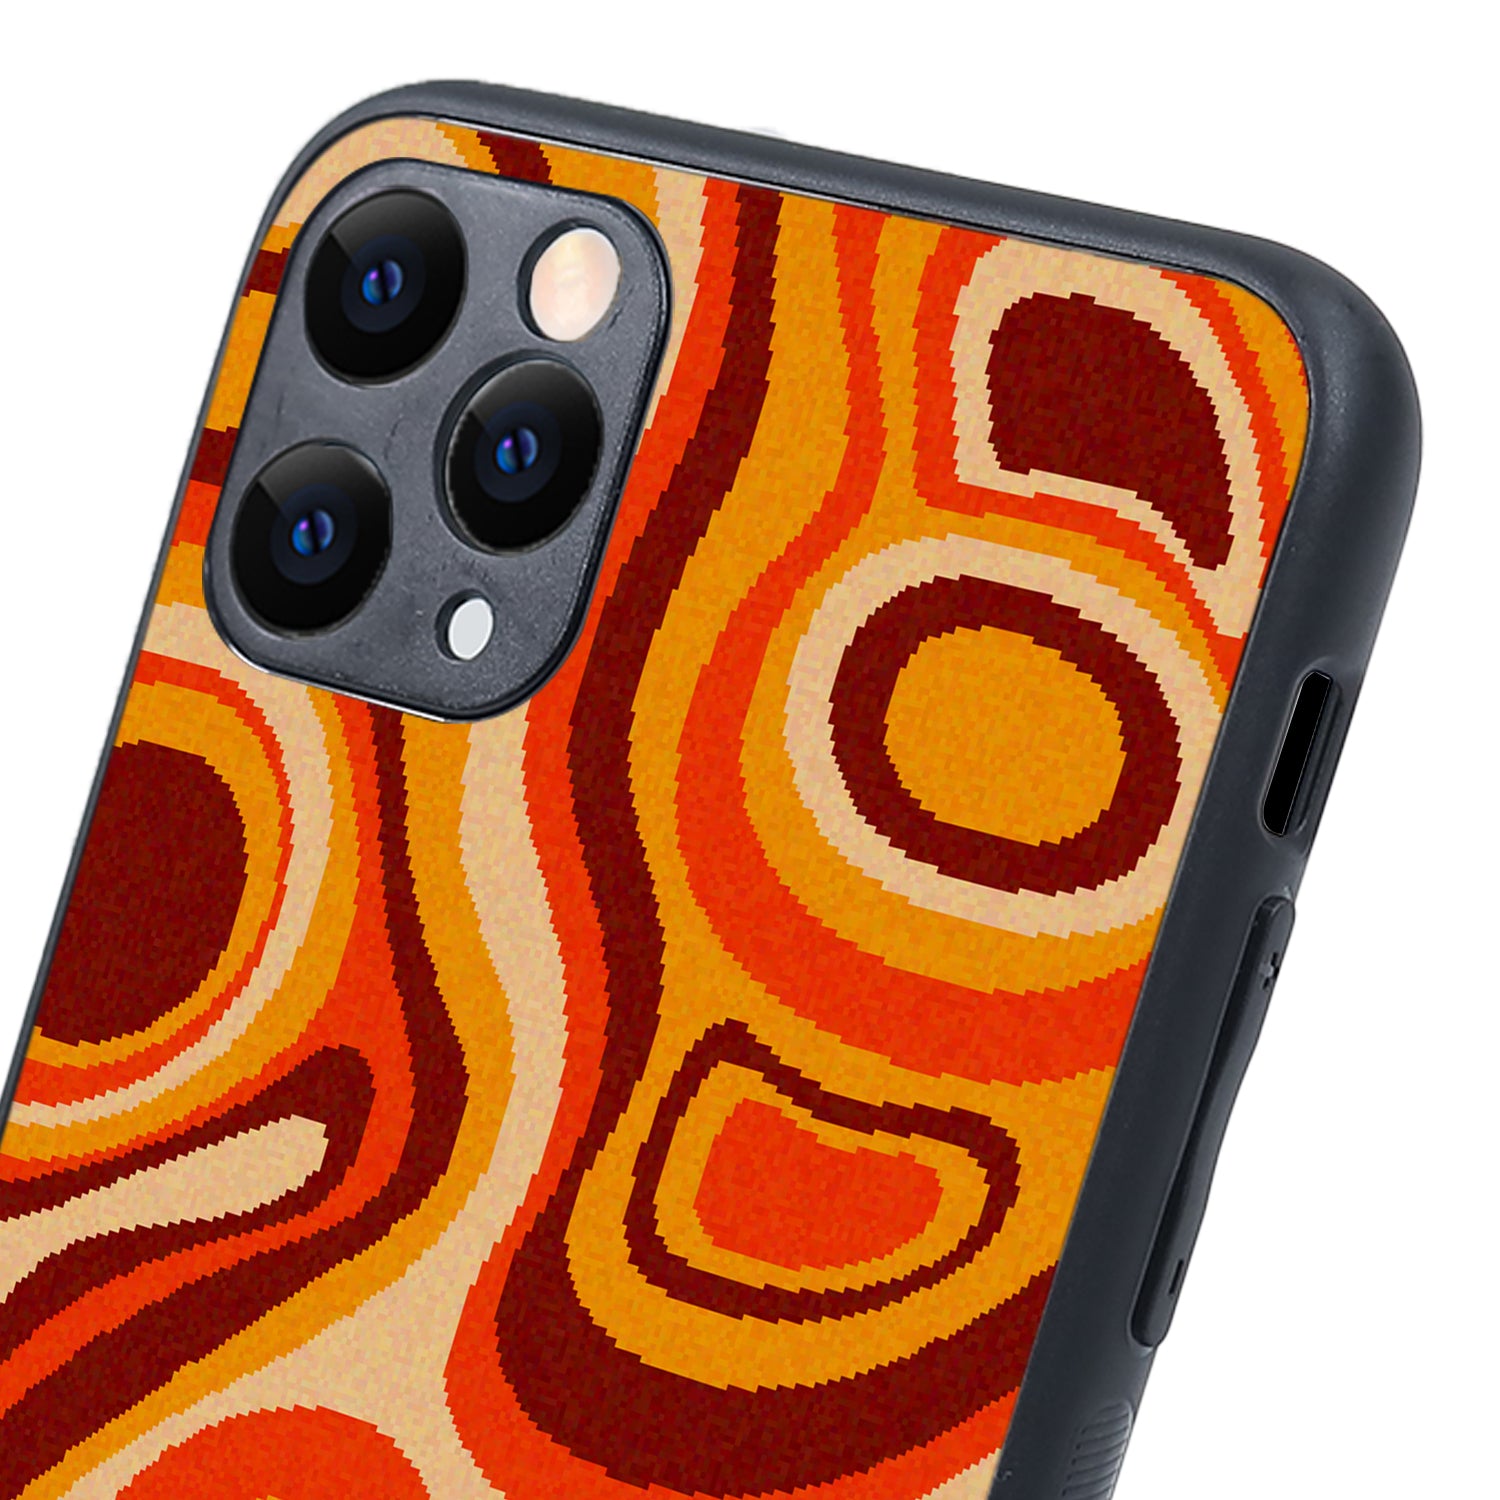 Drip Marble iPhone 11 Pro Max Case